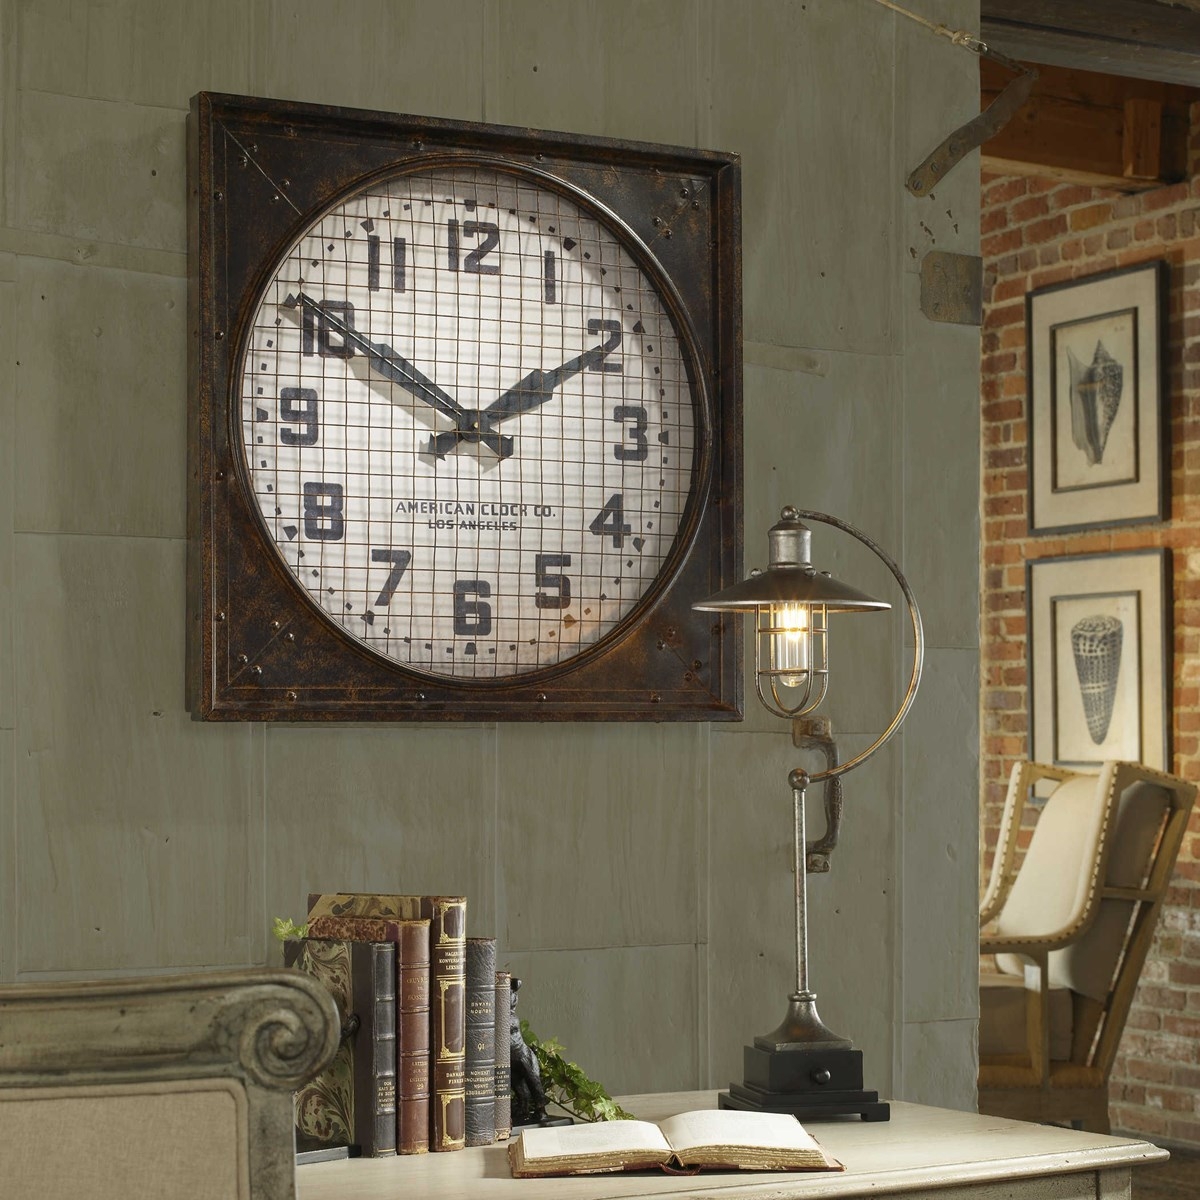 WAREHOUSE WALL CLOCK WITH GRILL - Image 1